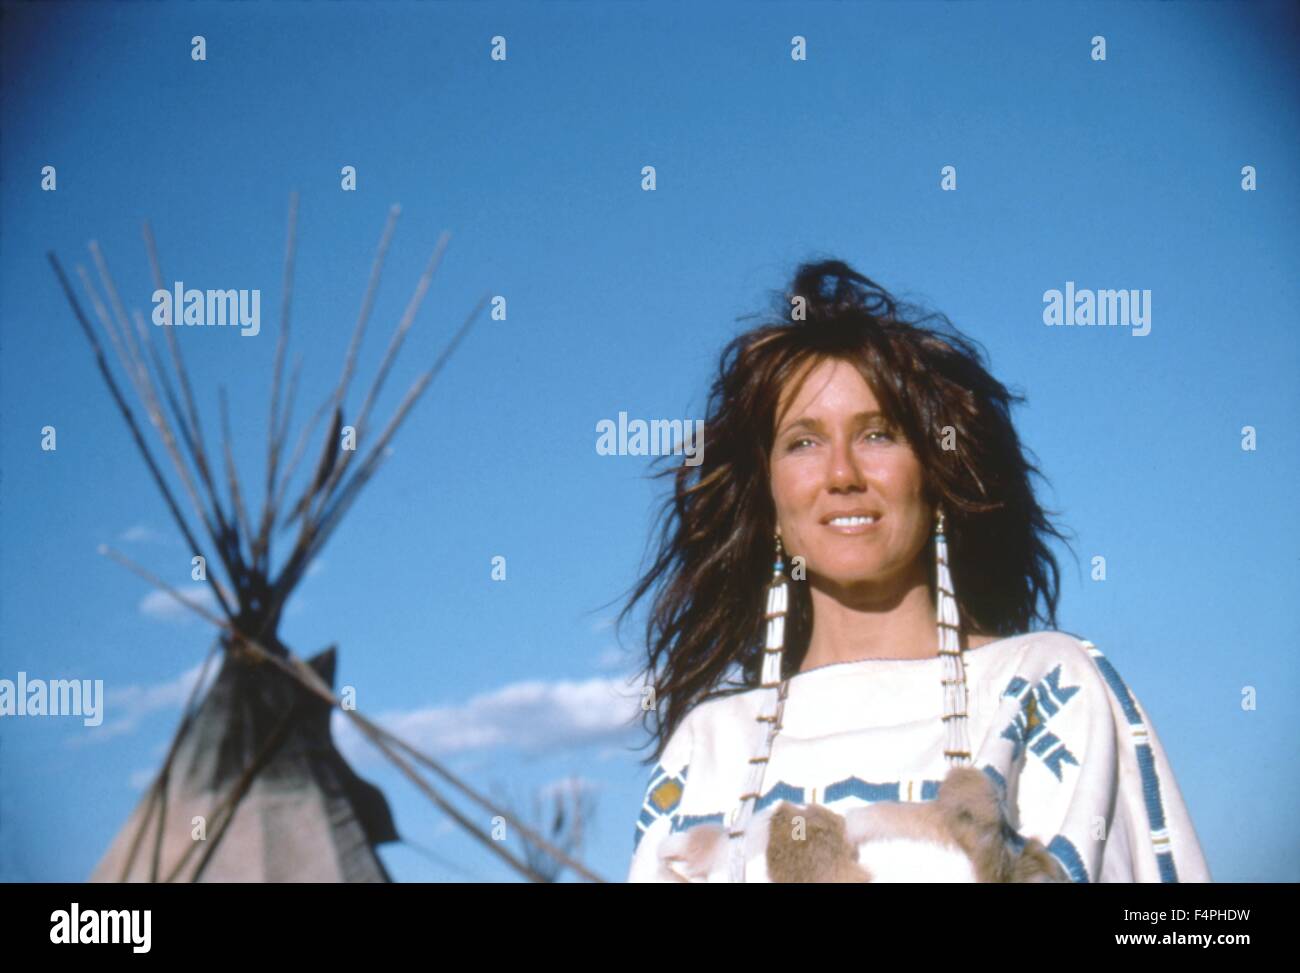 Mary mcdonnell dances with wolves photos